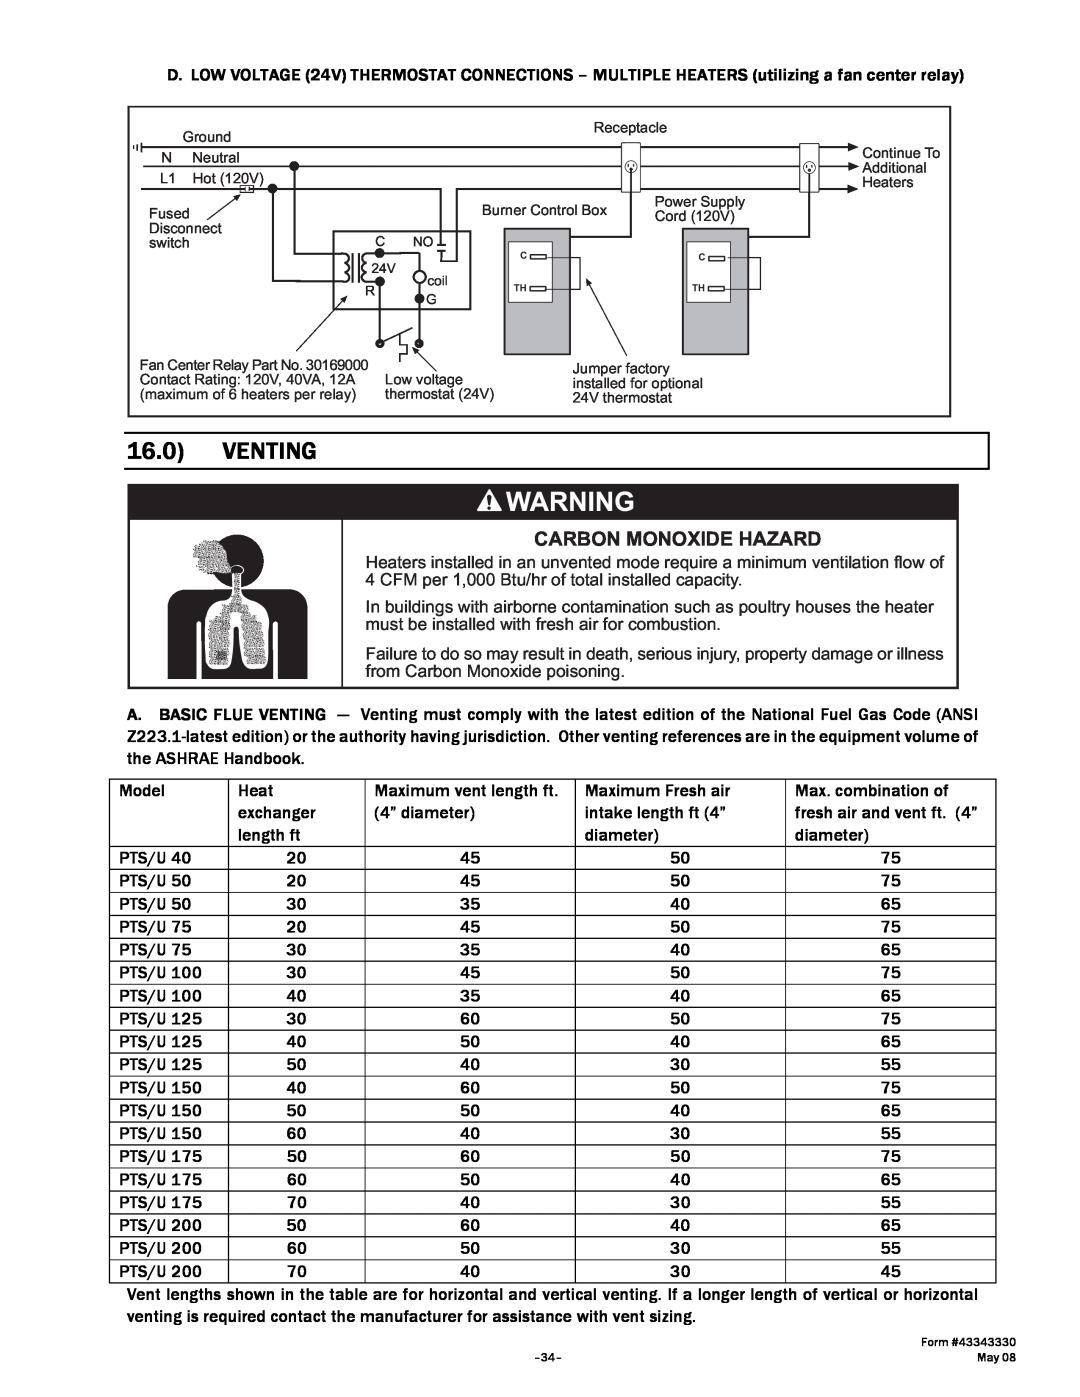 Gas-Fired Products PTU Series, PTS Series manual Venting, Carbon Monoxide Hazard 